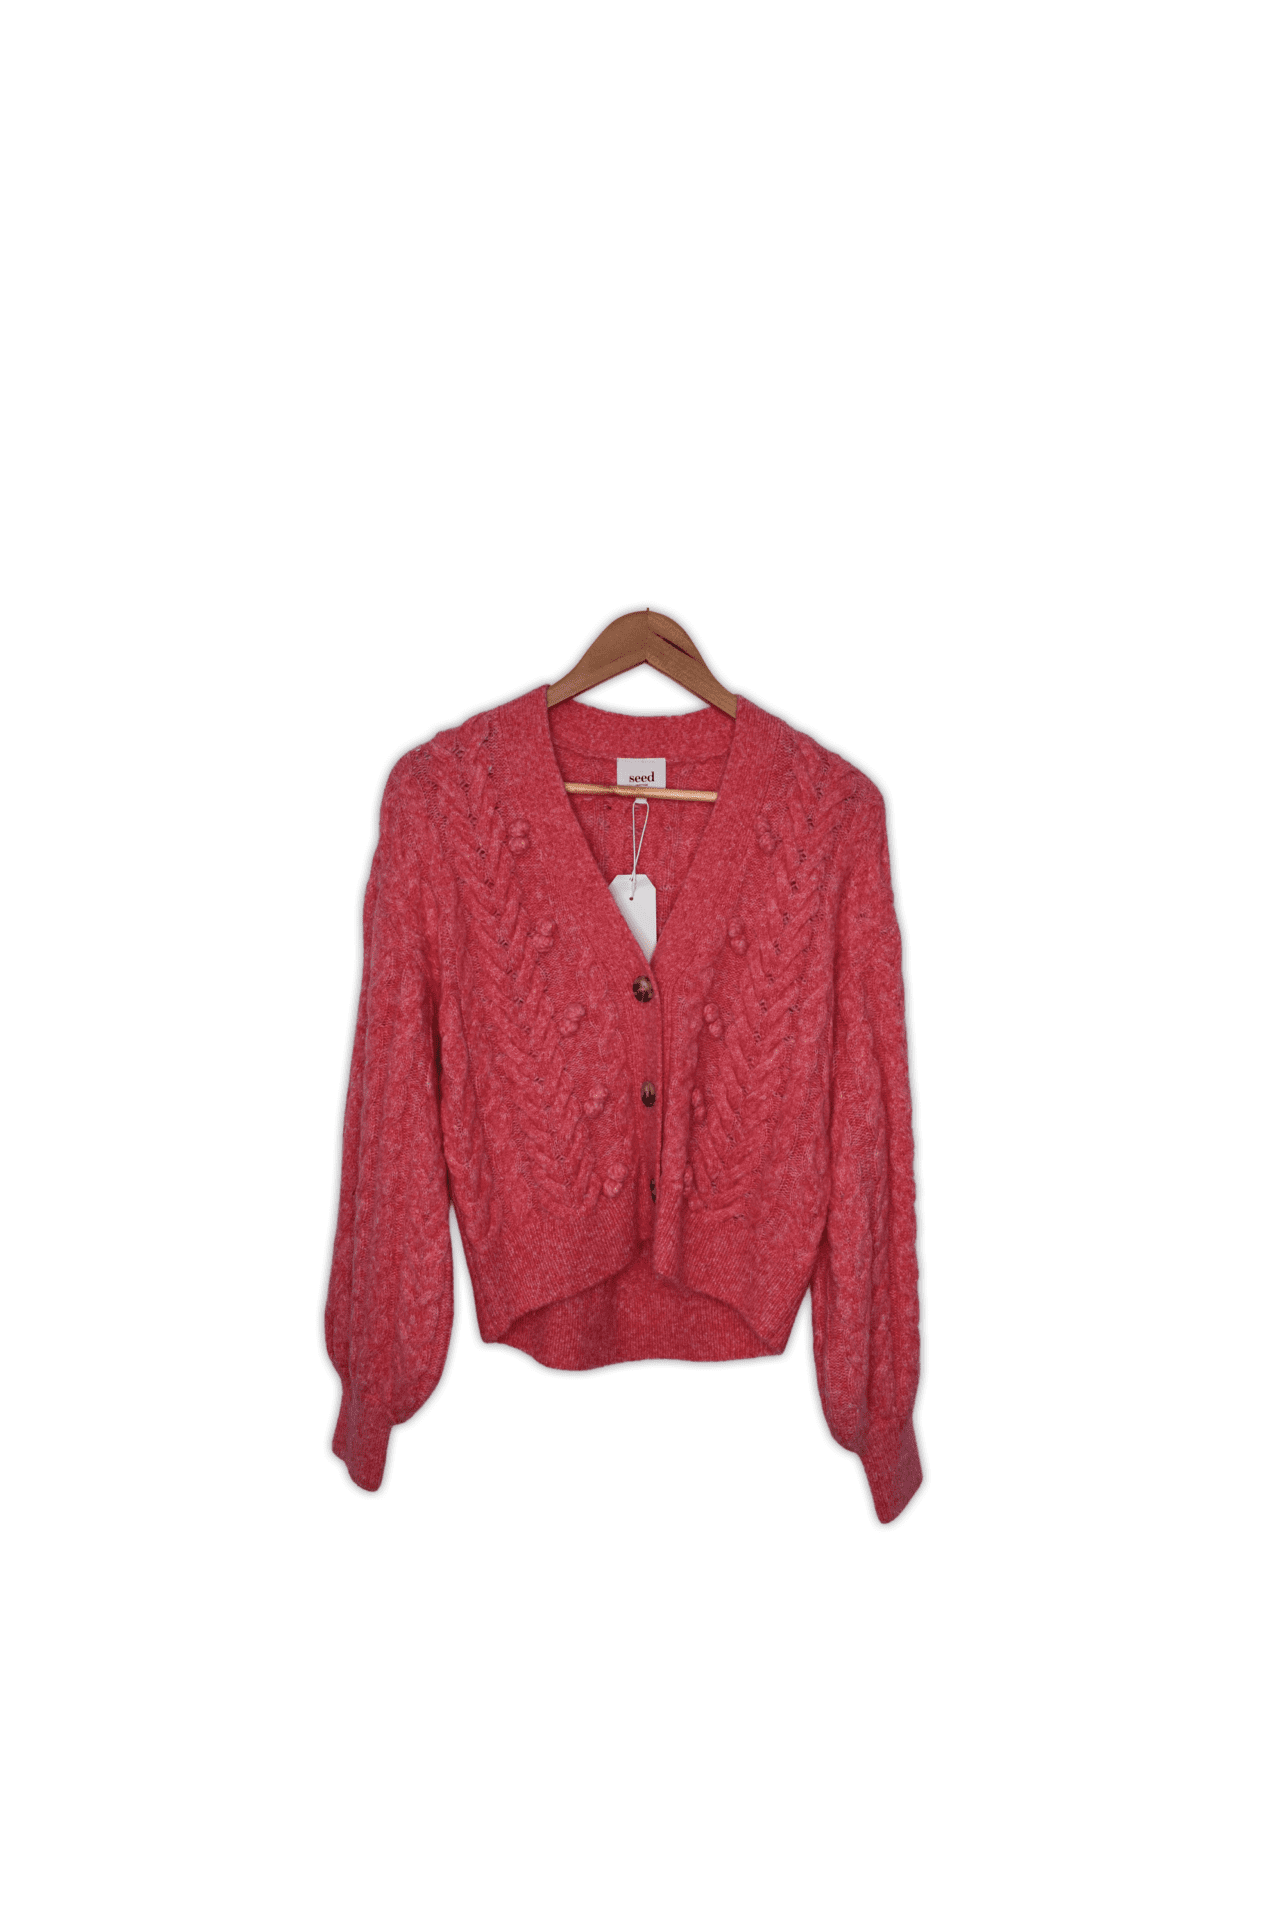 Crafted from a premium blend with wool and alpaca, this cardigan is soft, comfortable, and stylish. It features pom pom details and braided cables, with a V neck leading into a cropped length. Fabric: 50% Wool, 33% Nylon, 17% Alpaca Colour: Rose Size: XS